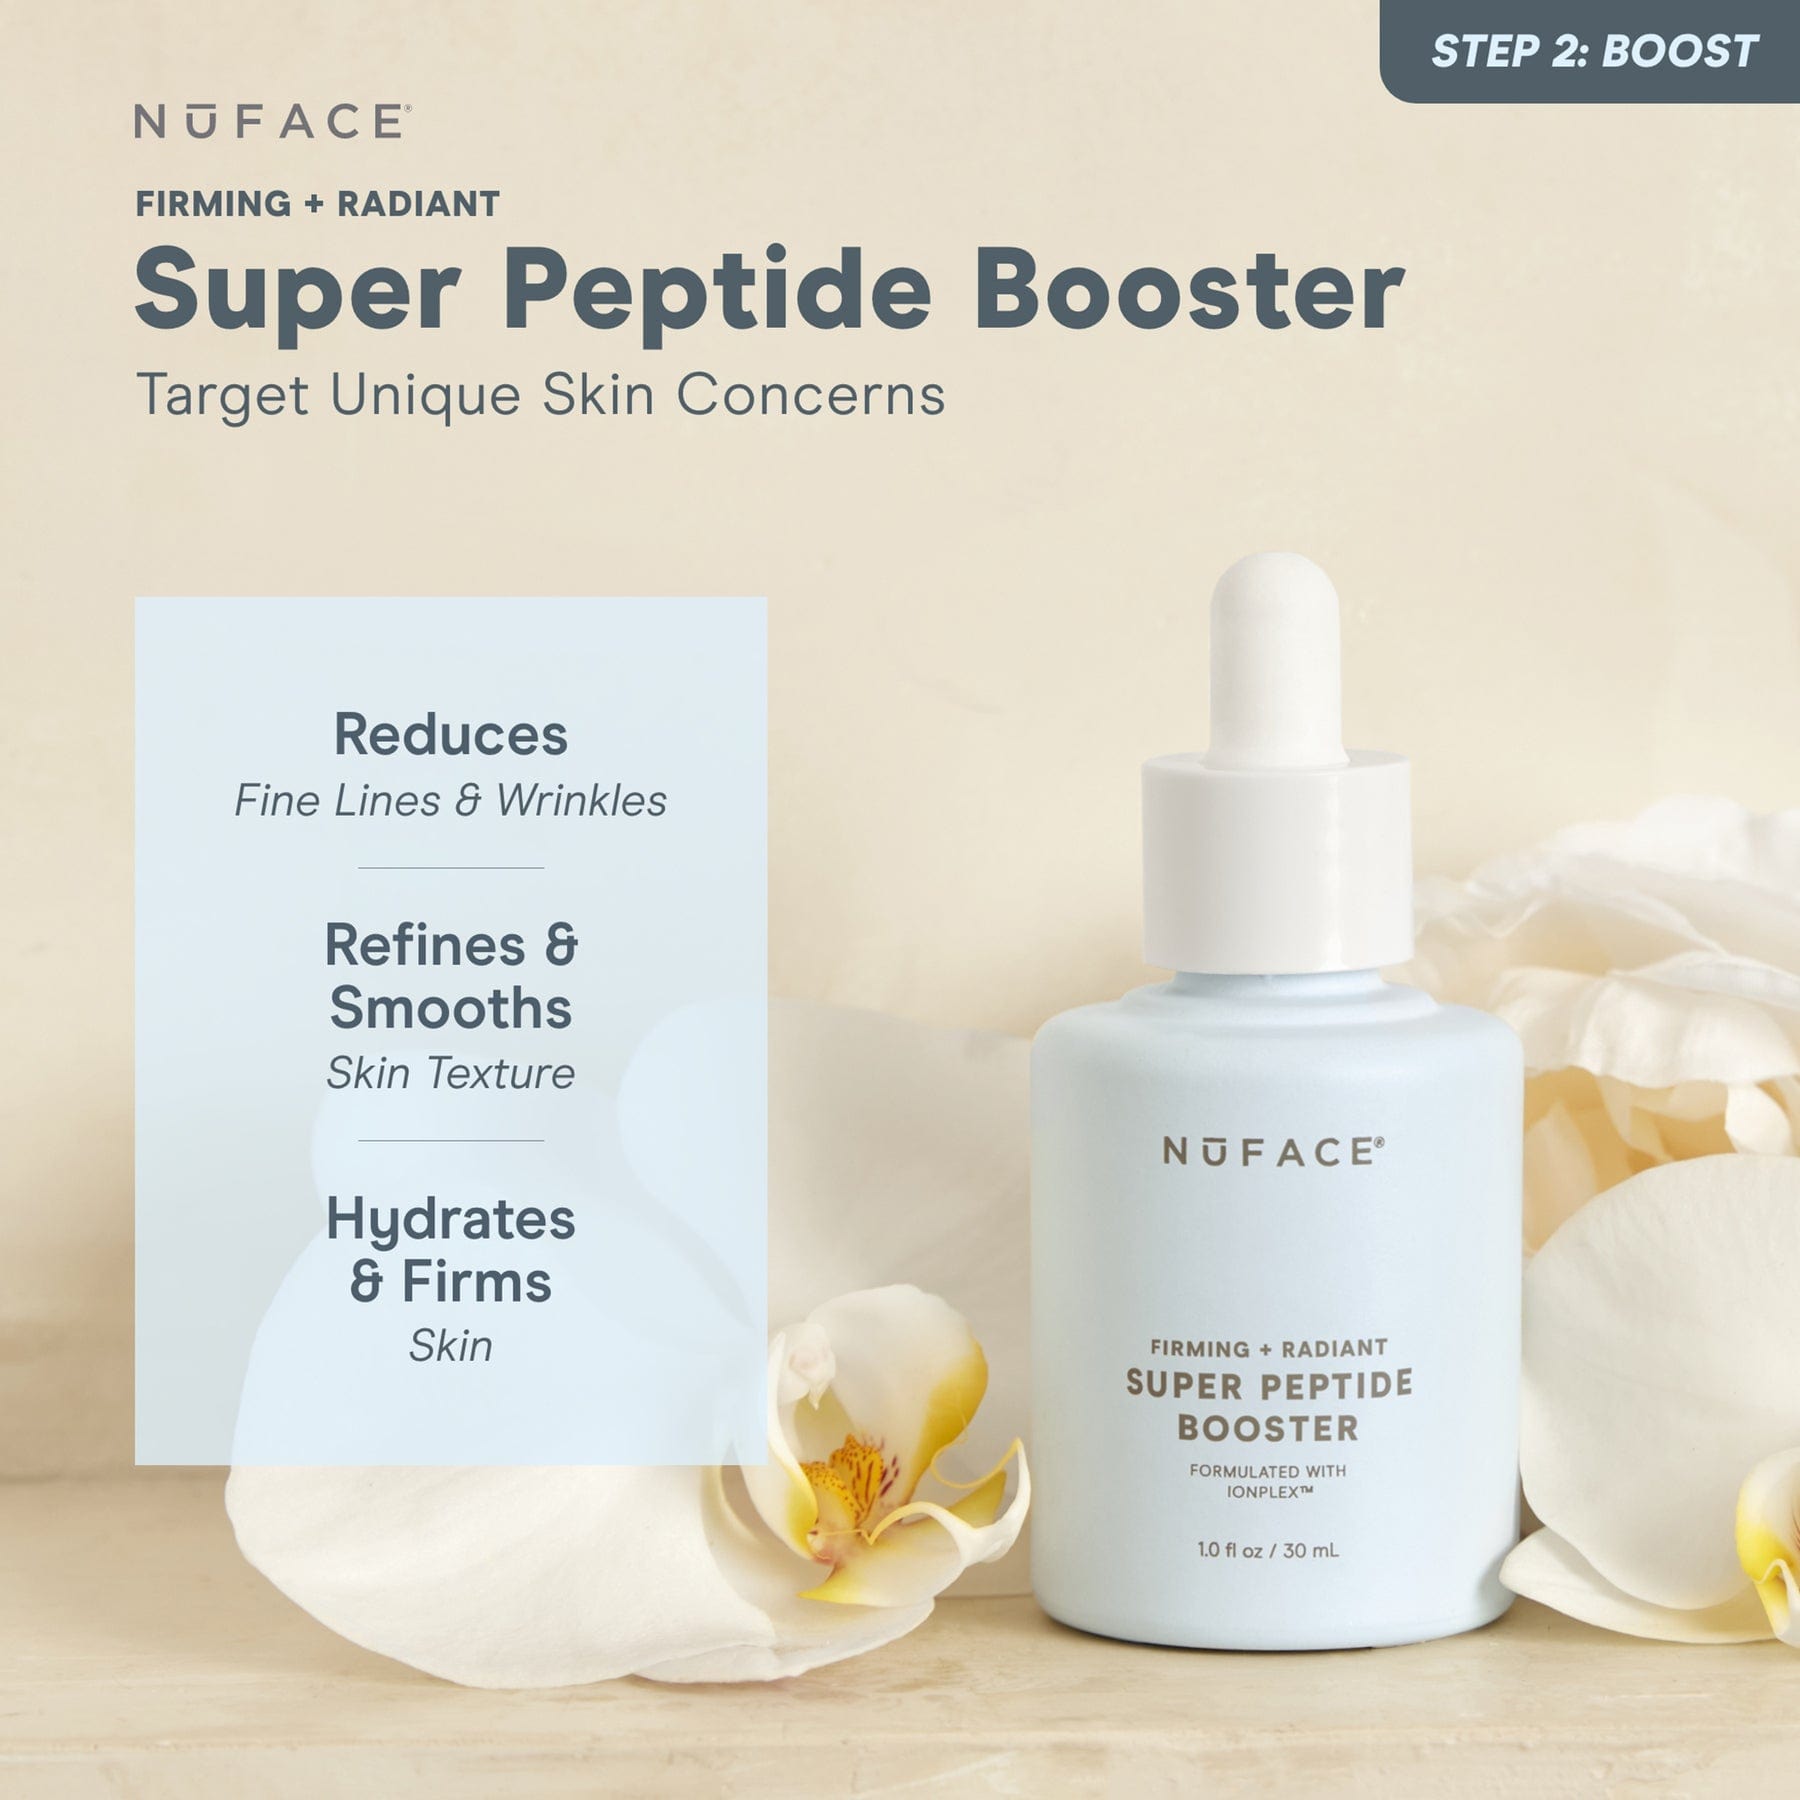 NuFACE booster peptide serum bottle showing benefits.